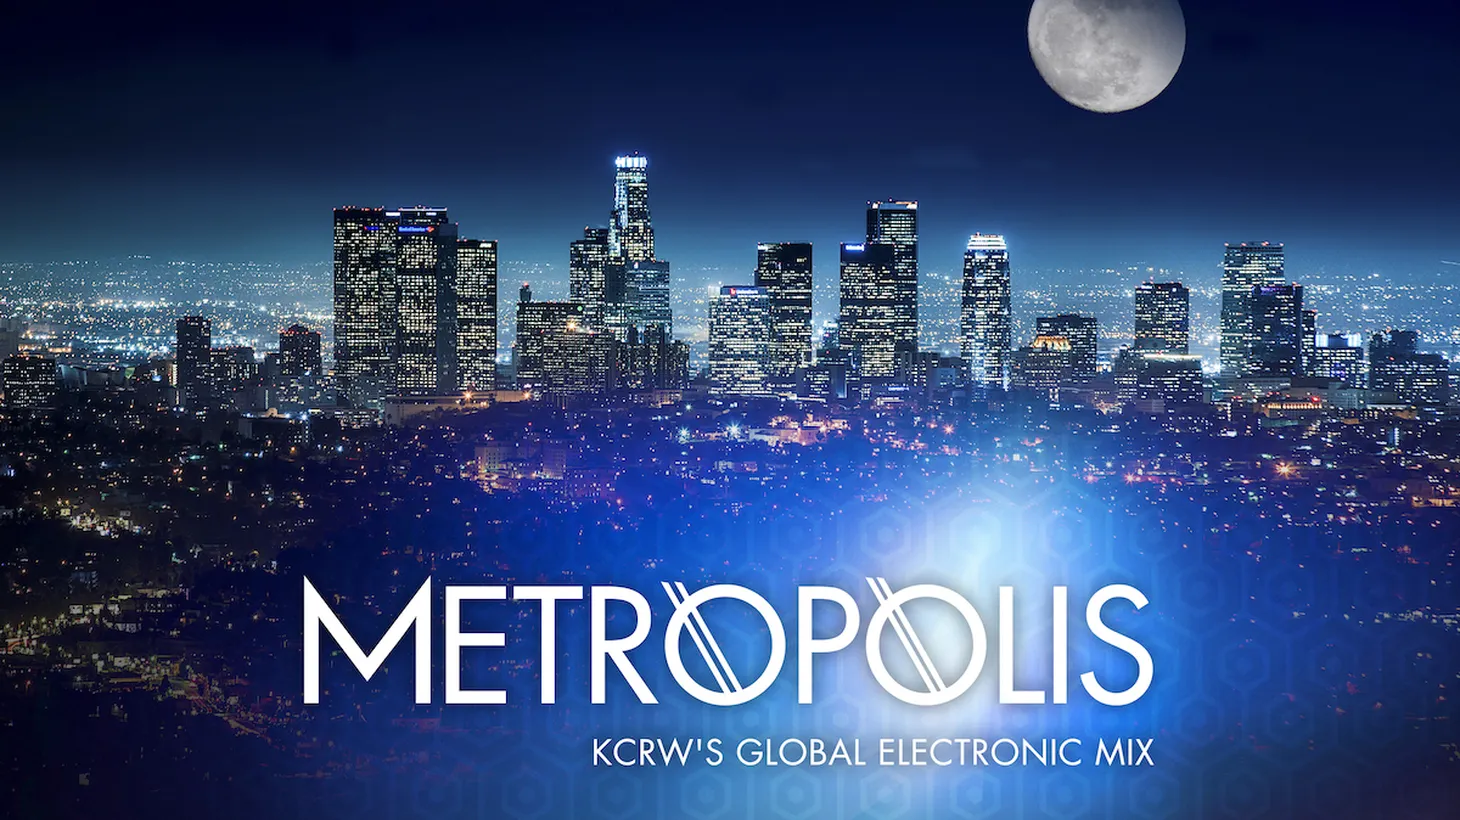 Breakbeat DJ/Producer Adam Freeland makes a surprise stop by Metropolis in the 9 o'clock hour for a guest DJ set.